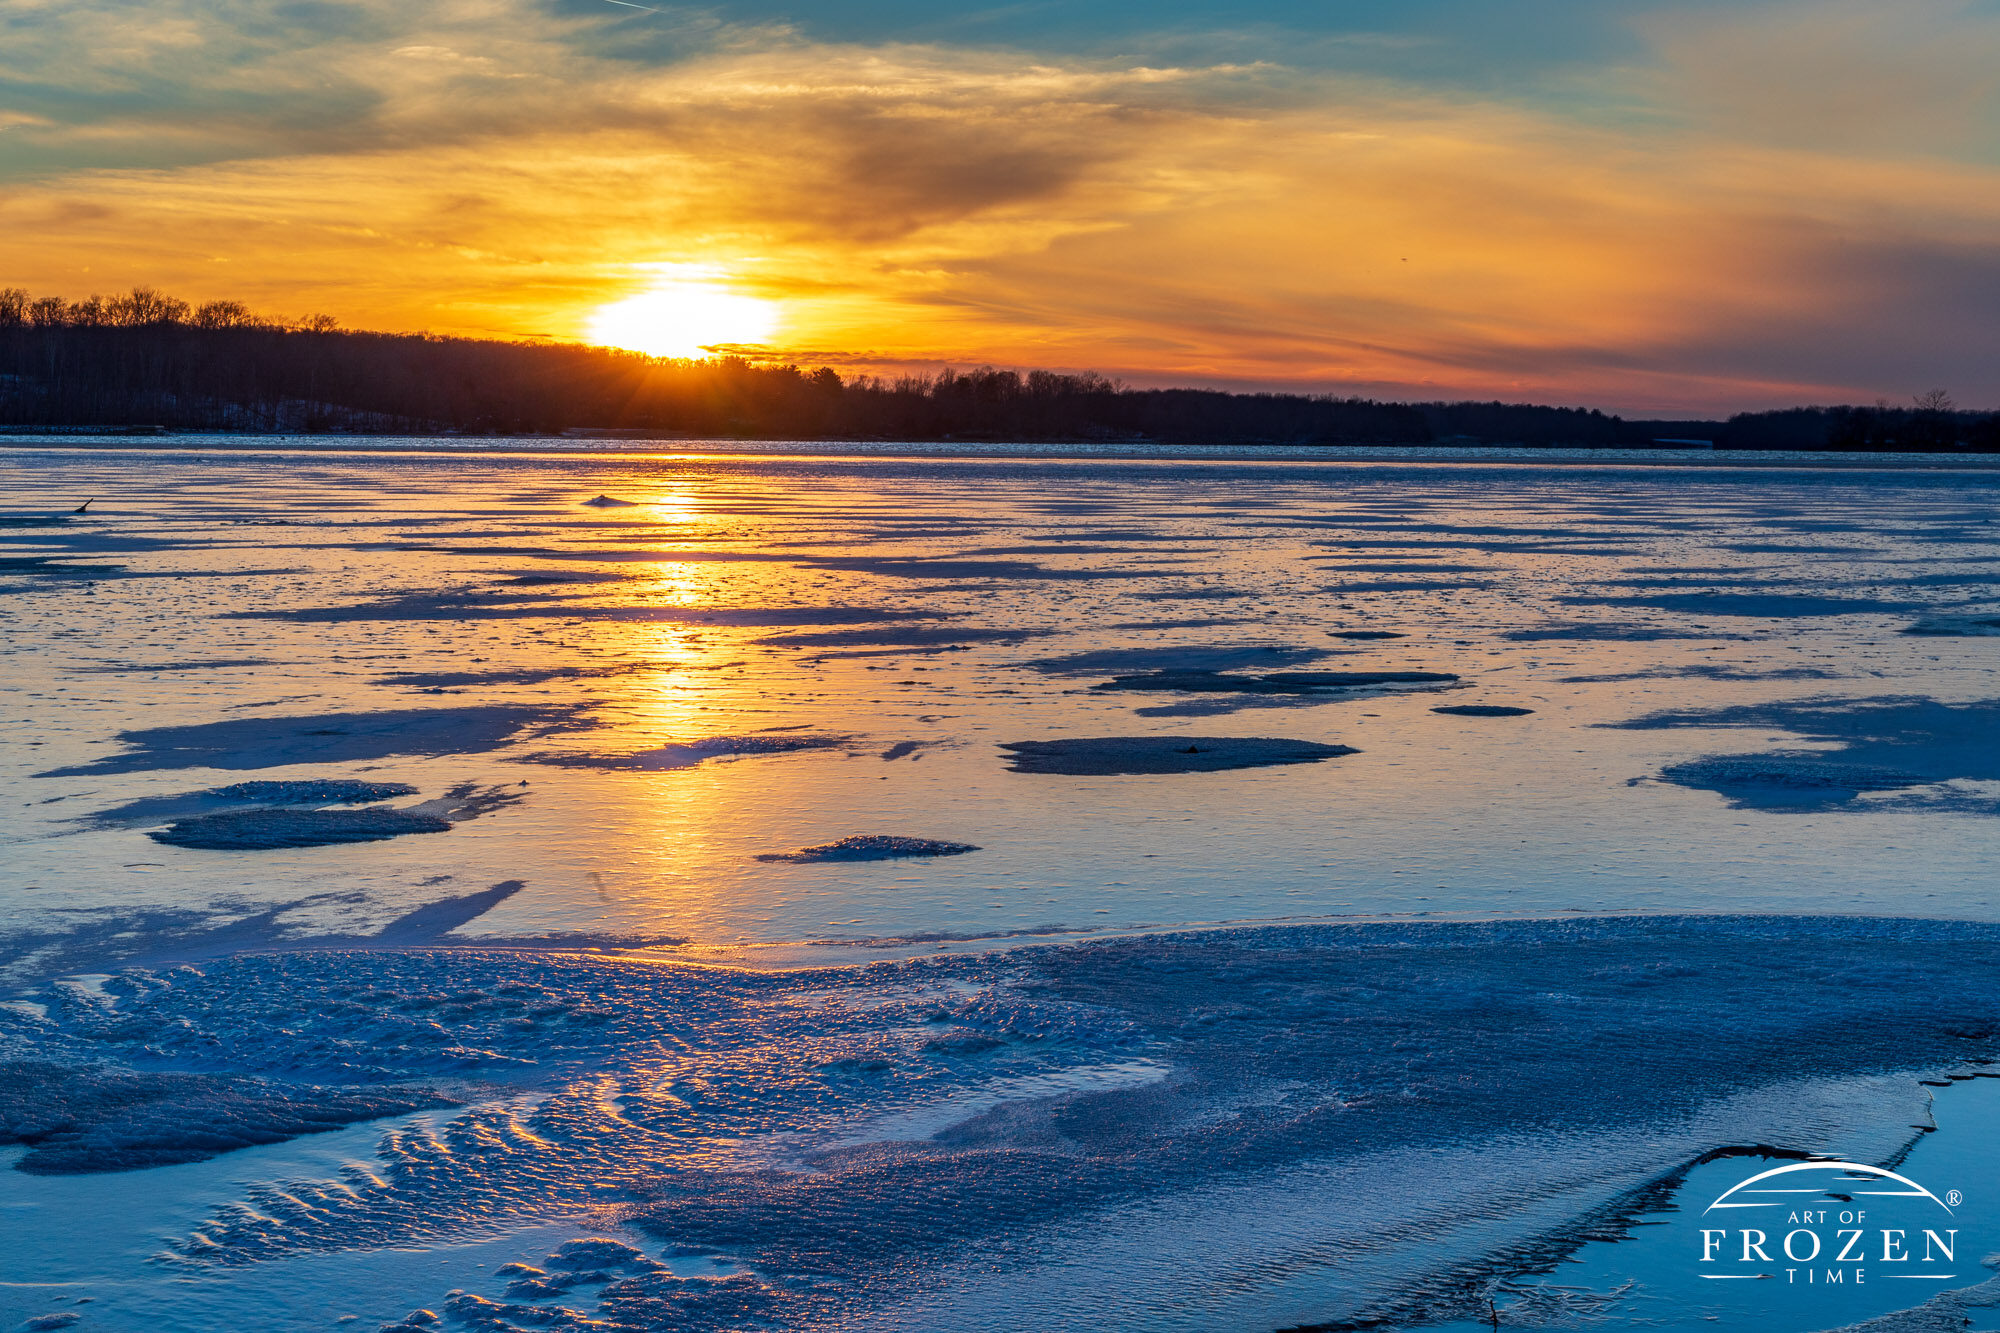 Interesting textures and ripples locked in place as the dusky sunset sets over this frozen lake.